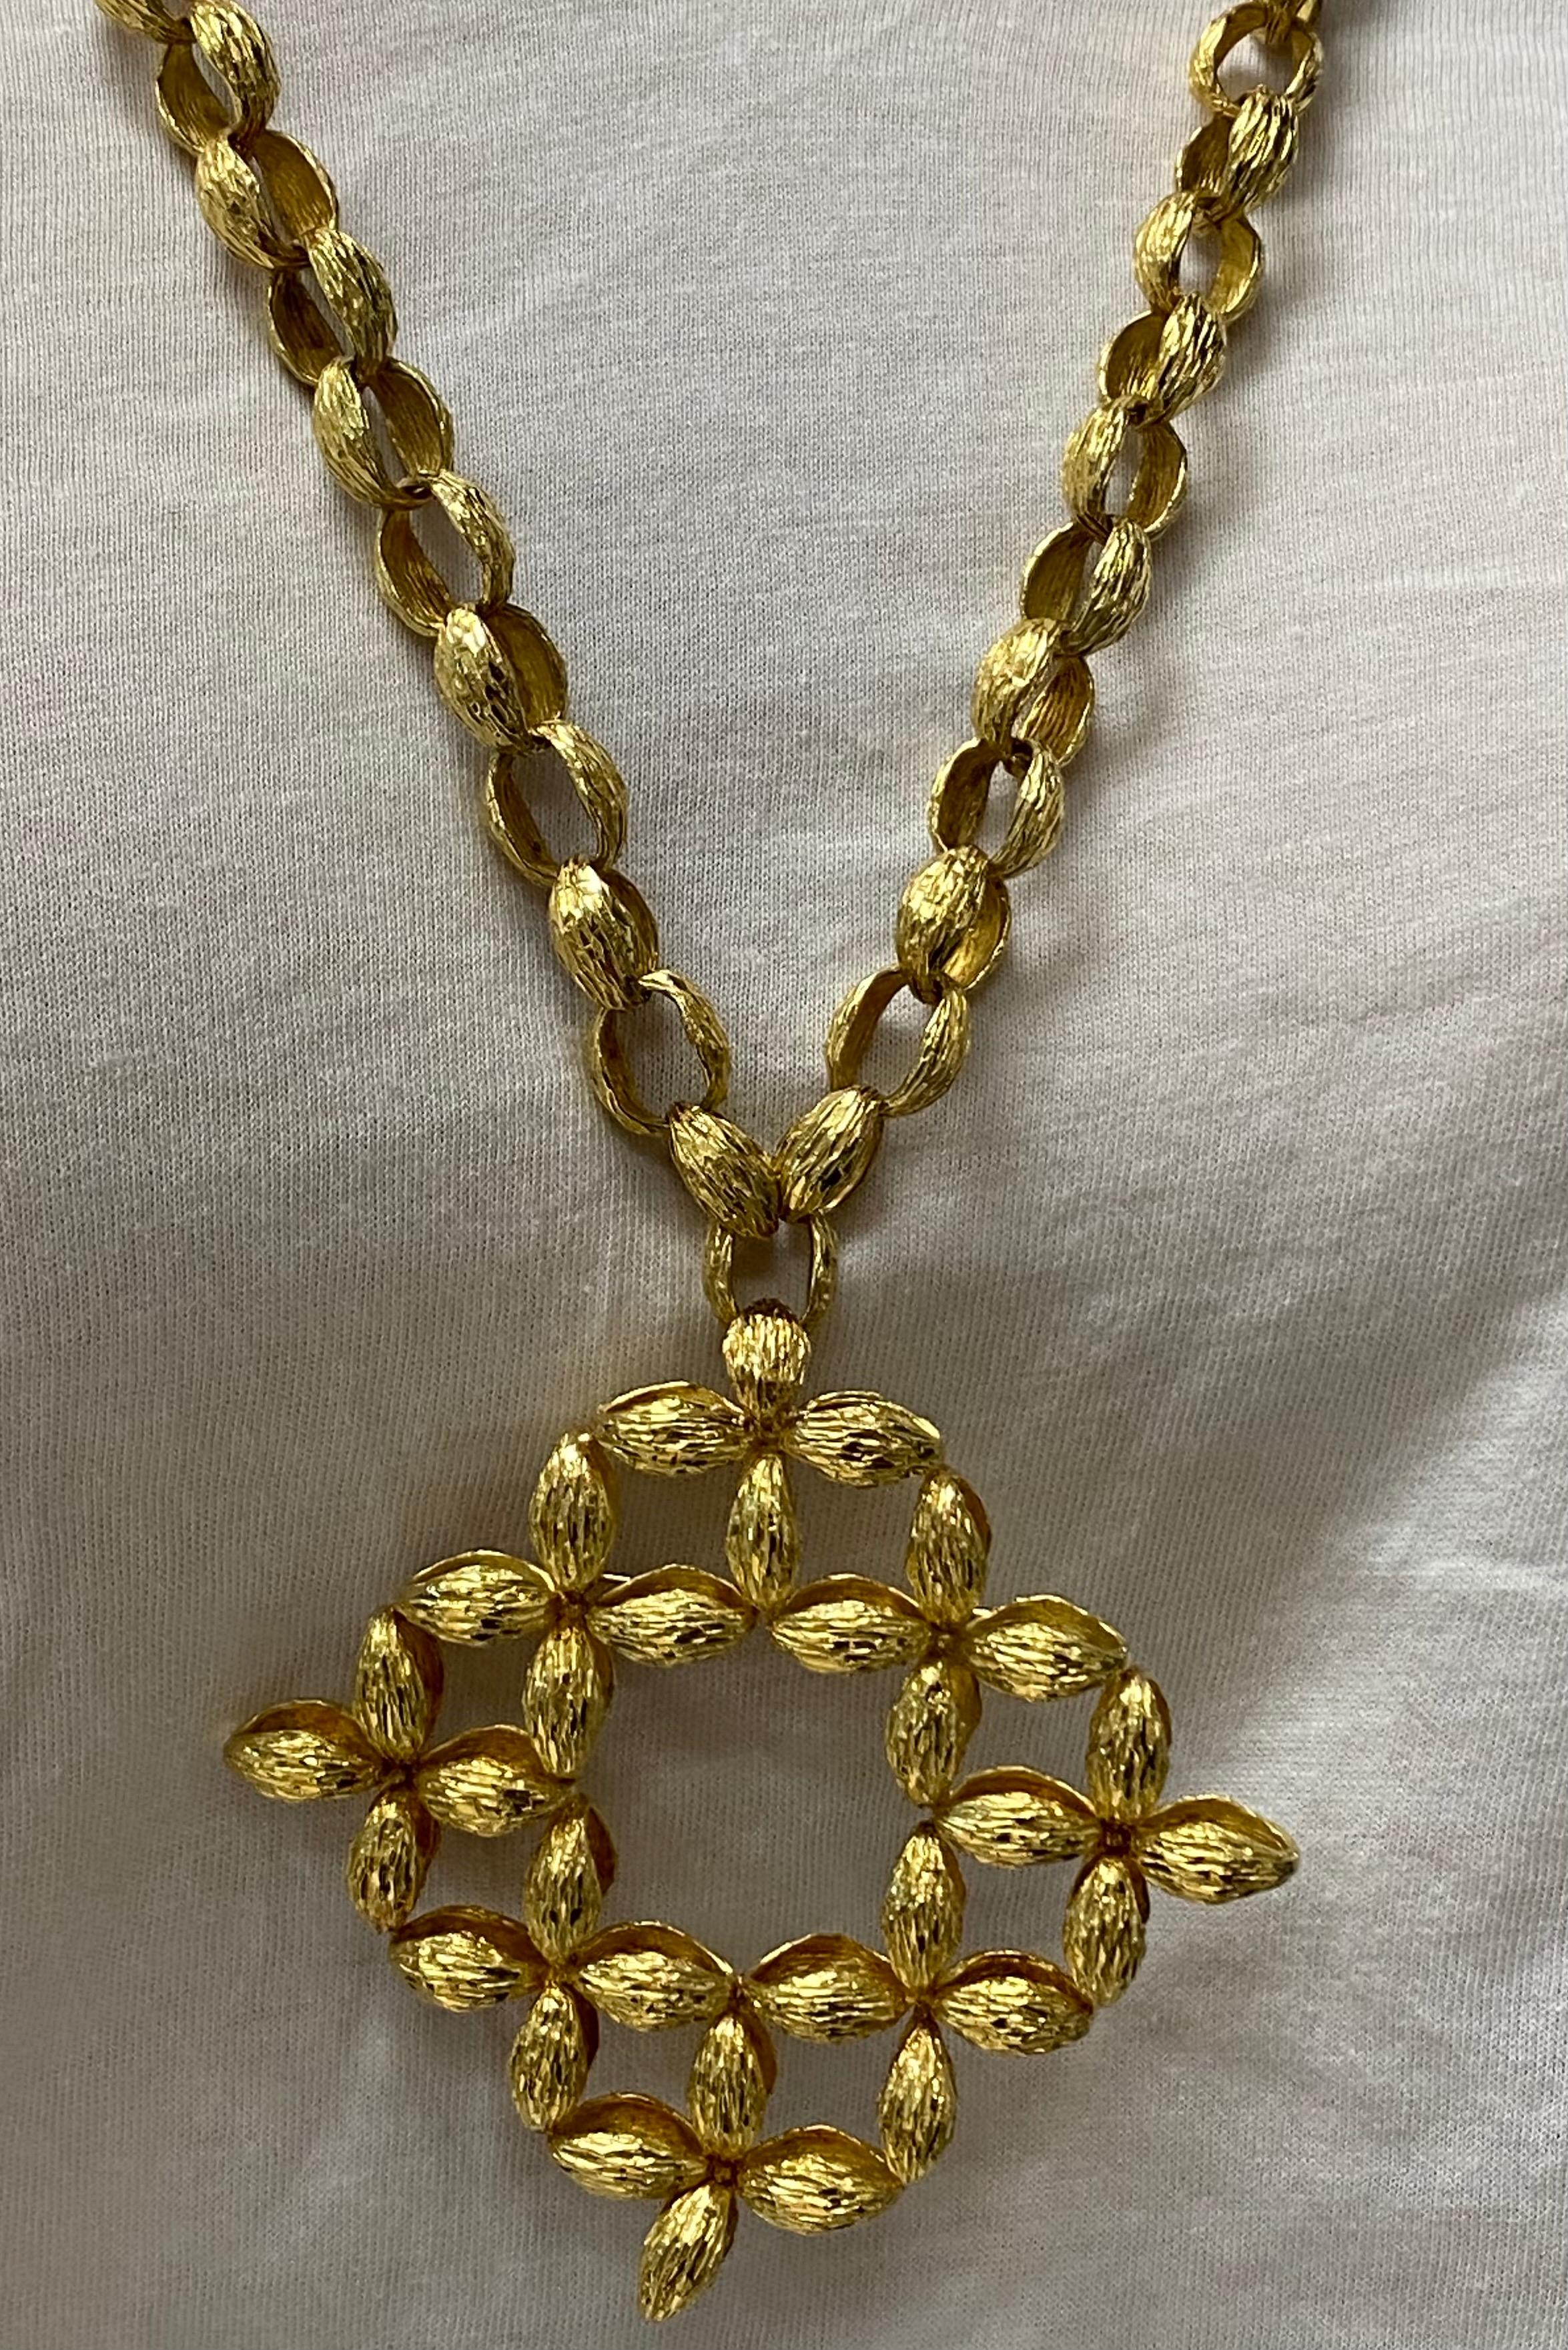 Vintage Yellow Gold Oval Link Chain Necklace w/ Pendant & Brooch  For Sale 7